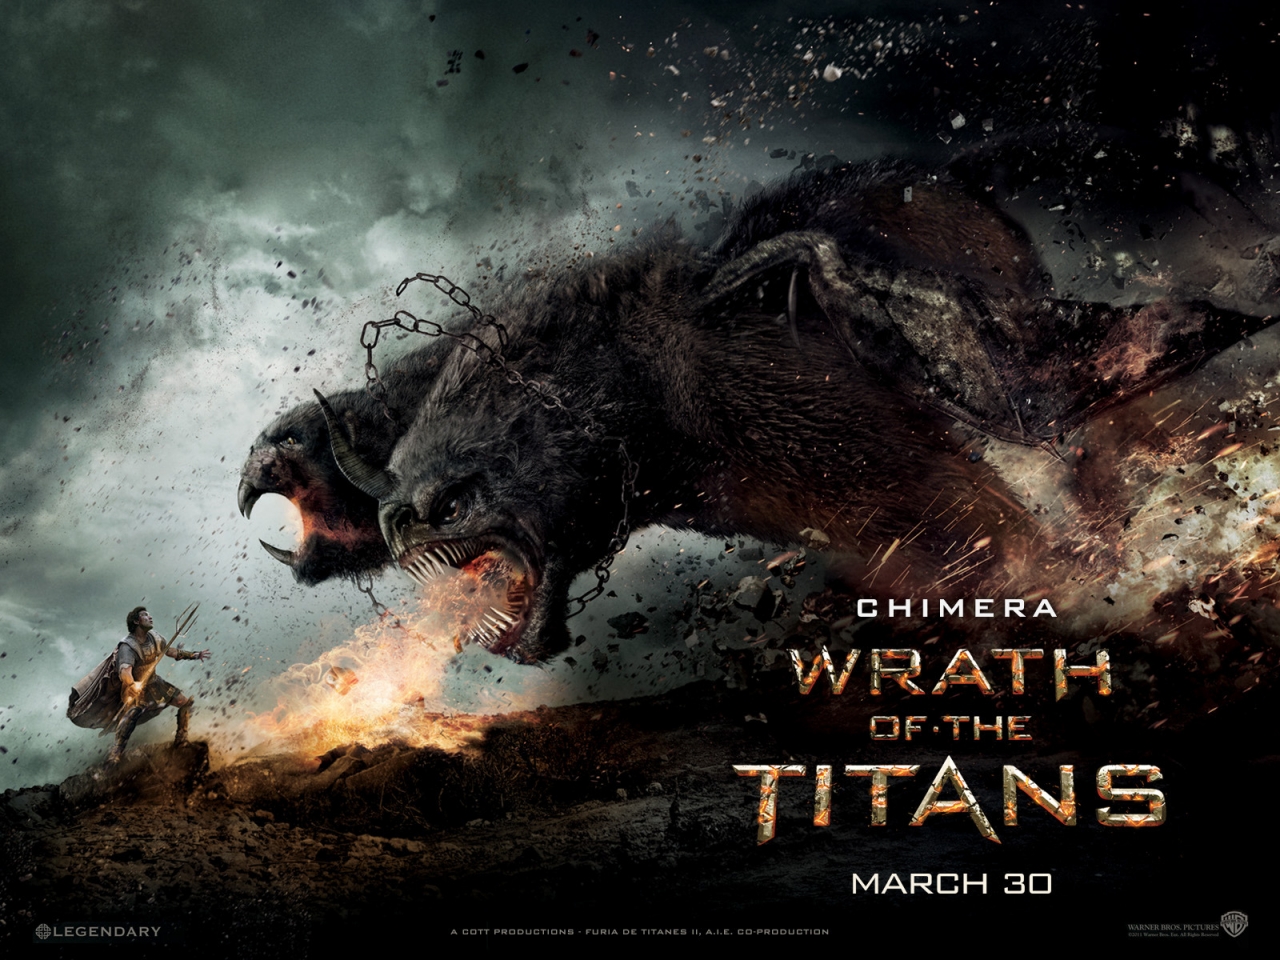 Chimera Wrath of the Titans for 1280 x 960 resolution